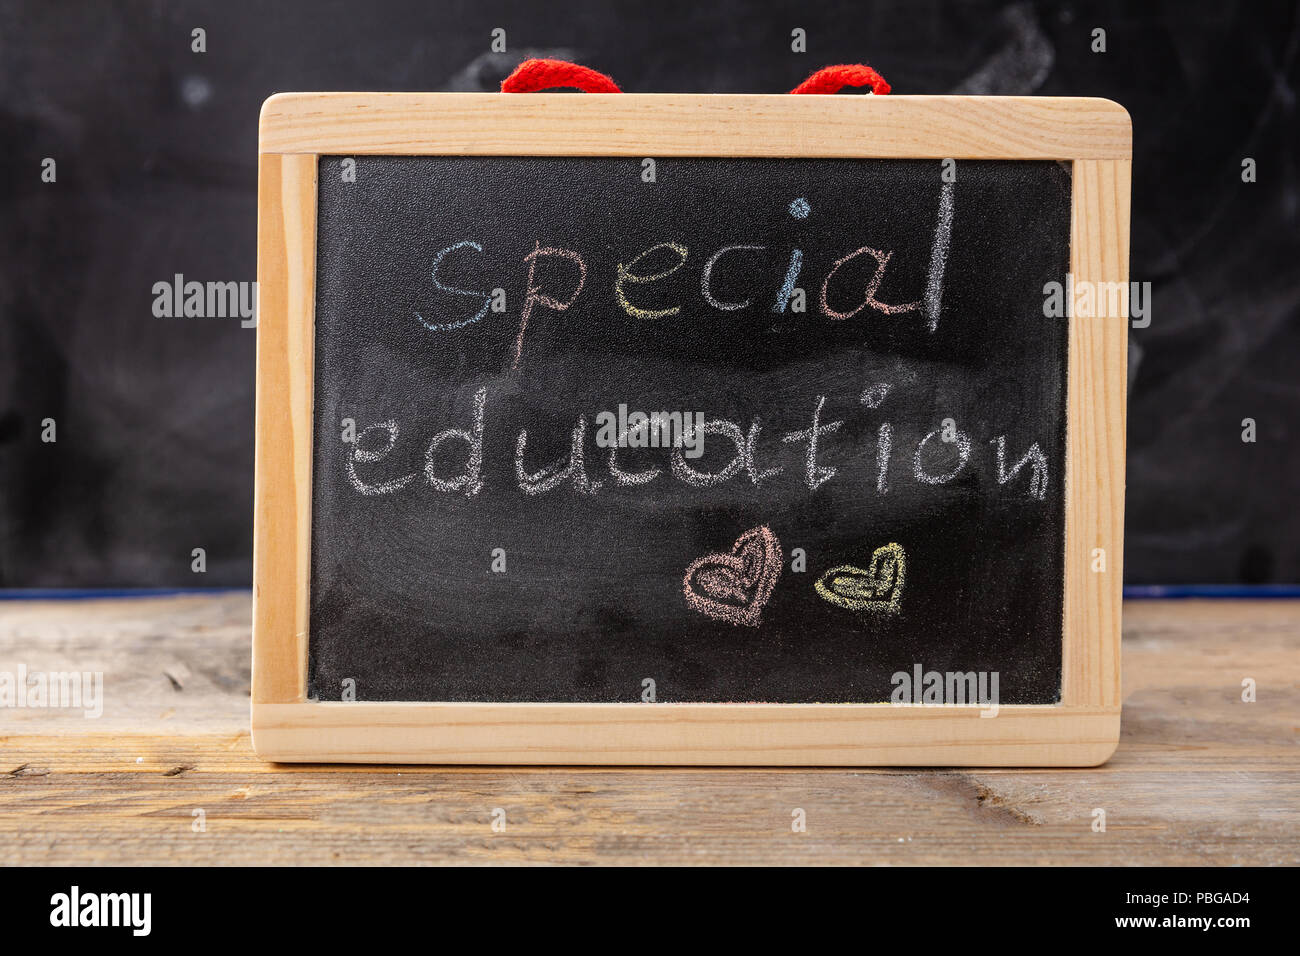 Special education text drawing on blackboard with frame Stock Photo